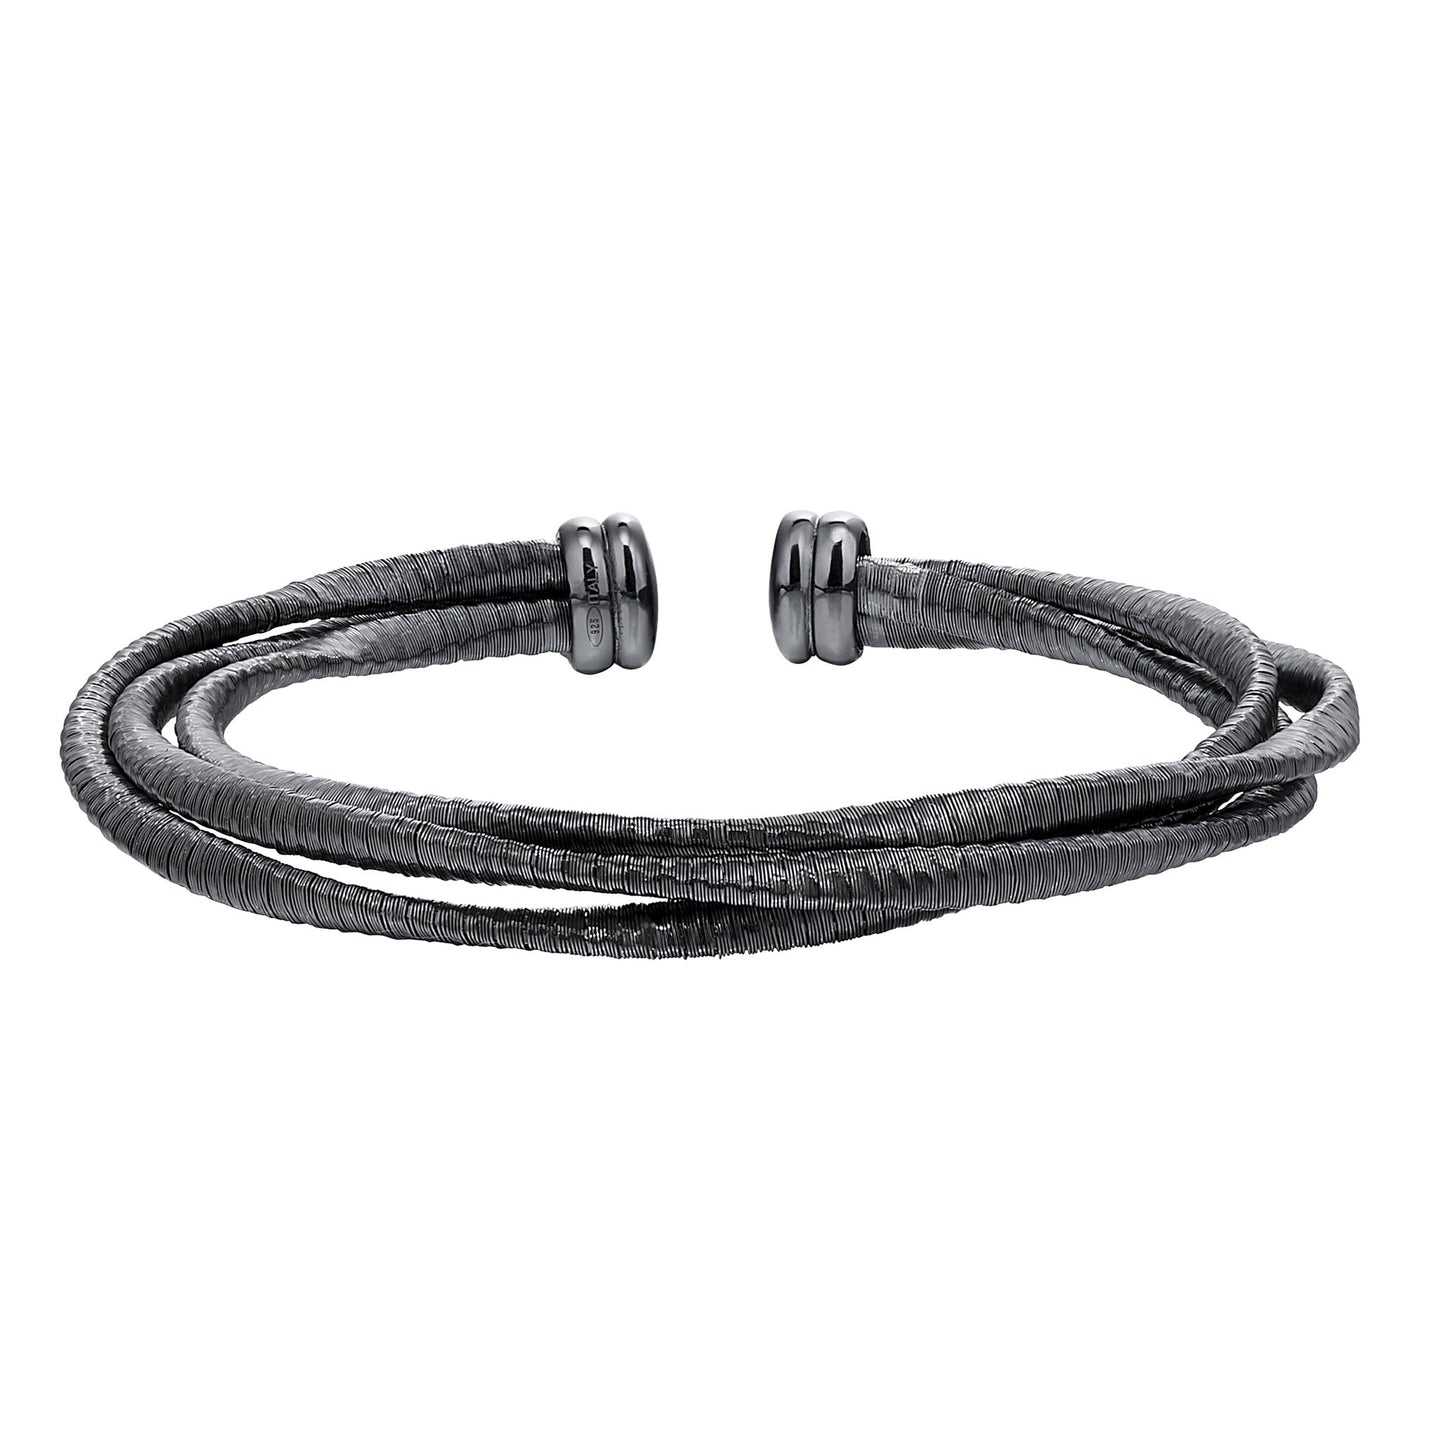 A twisted three cable bracelet displayed on a neutral white background.